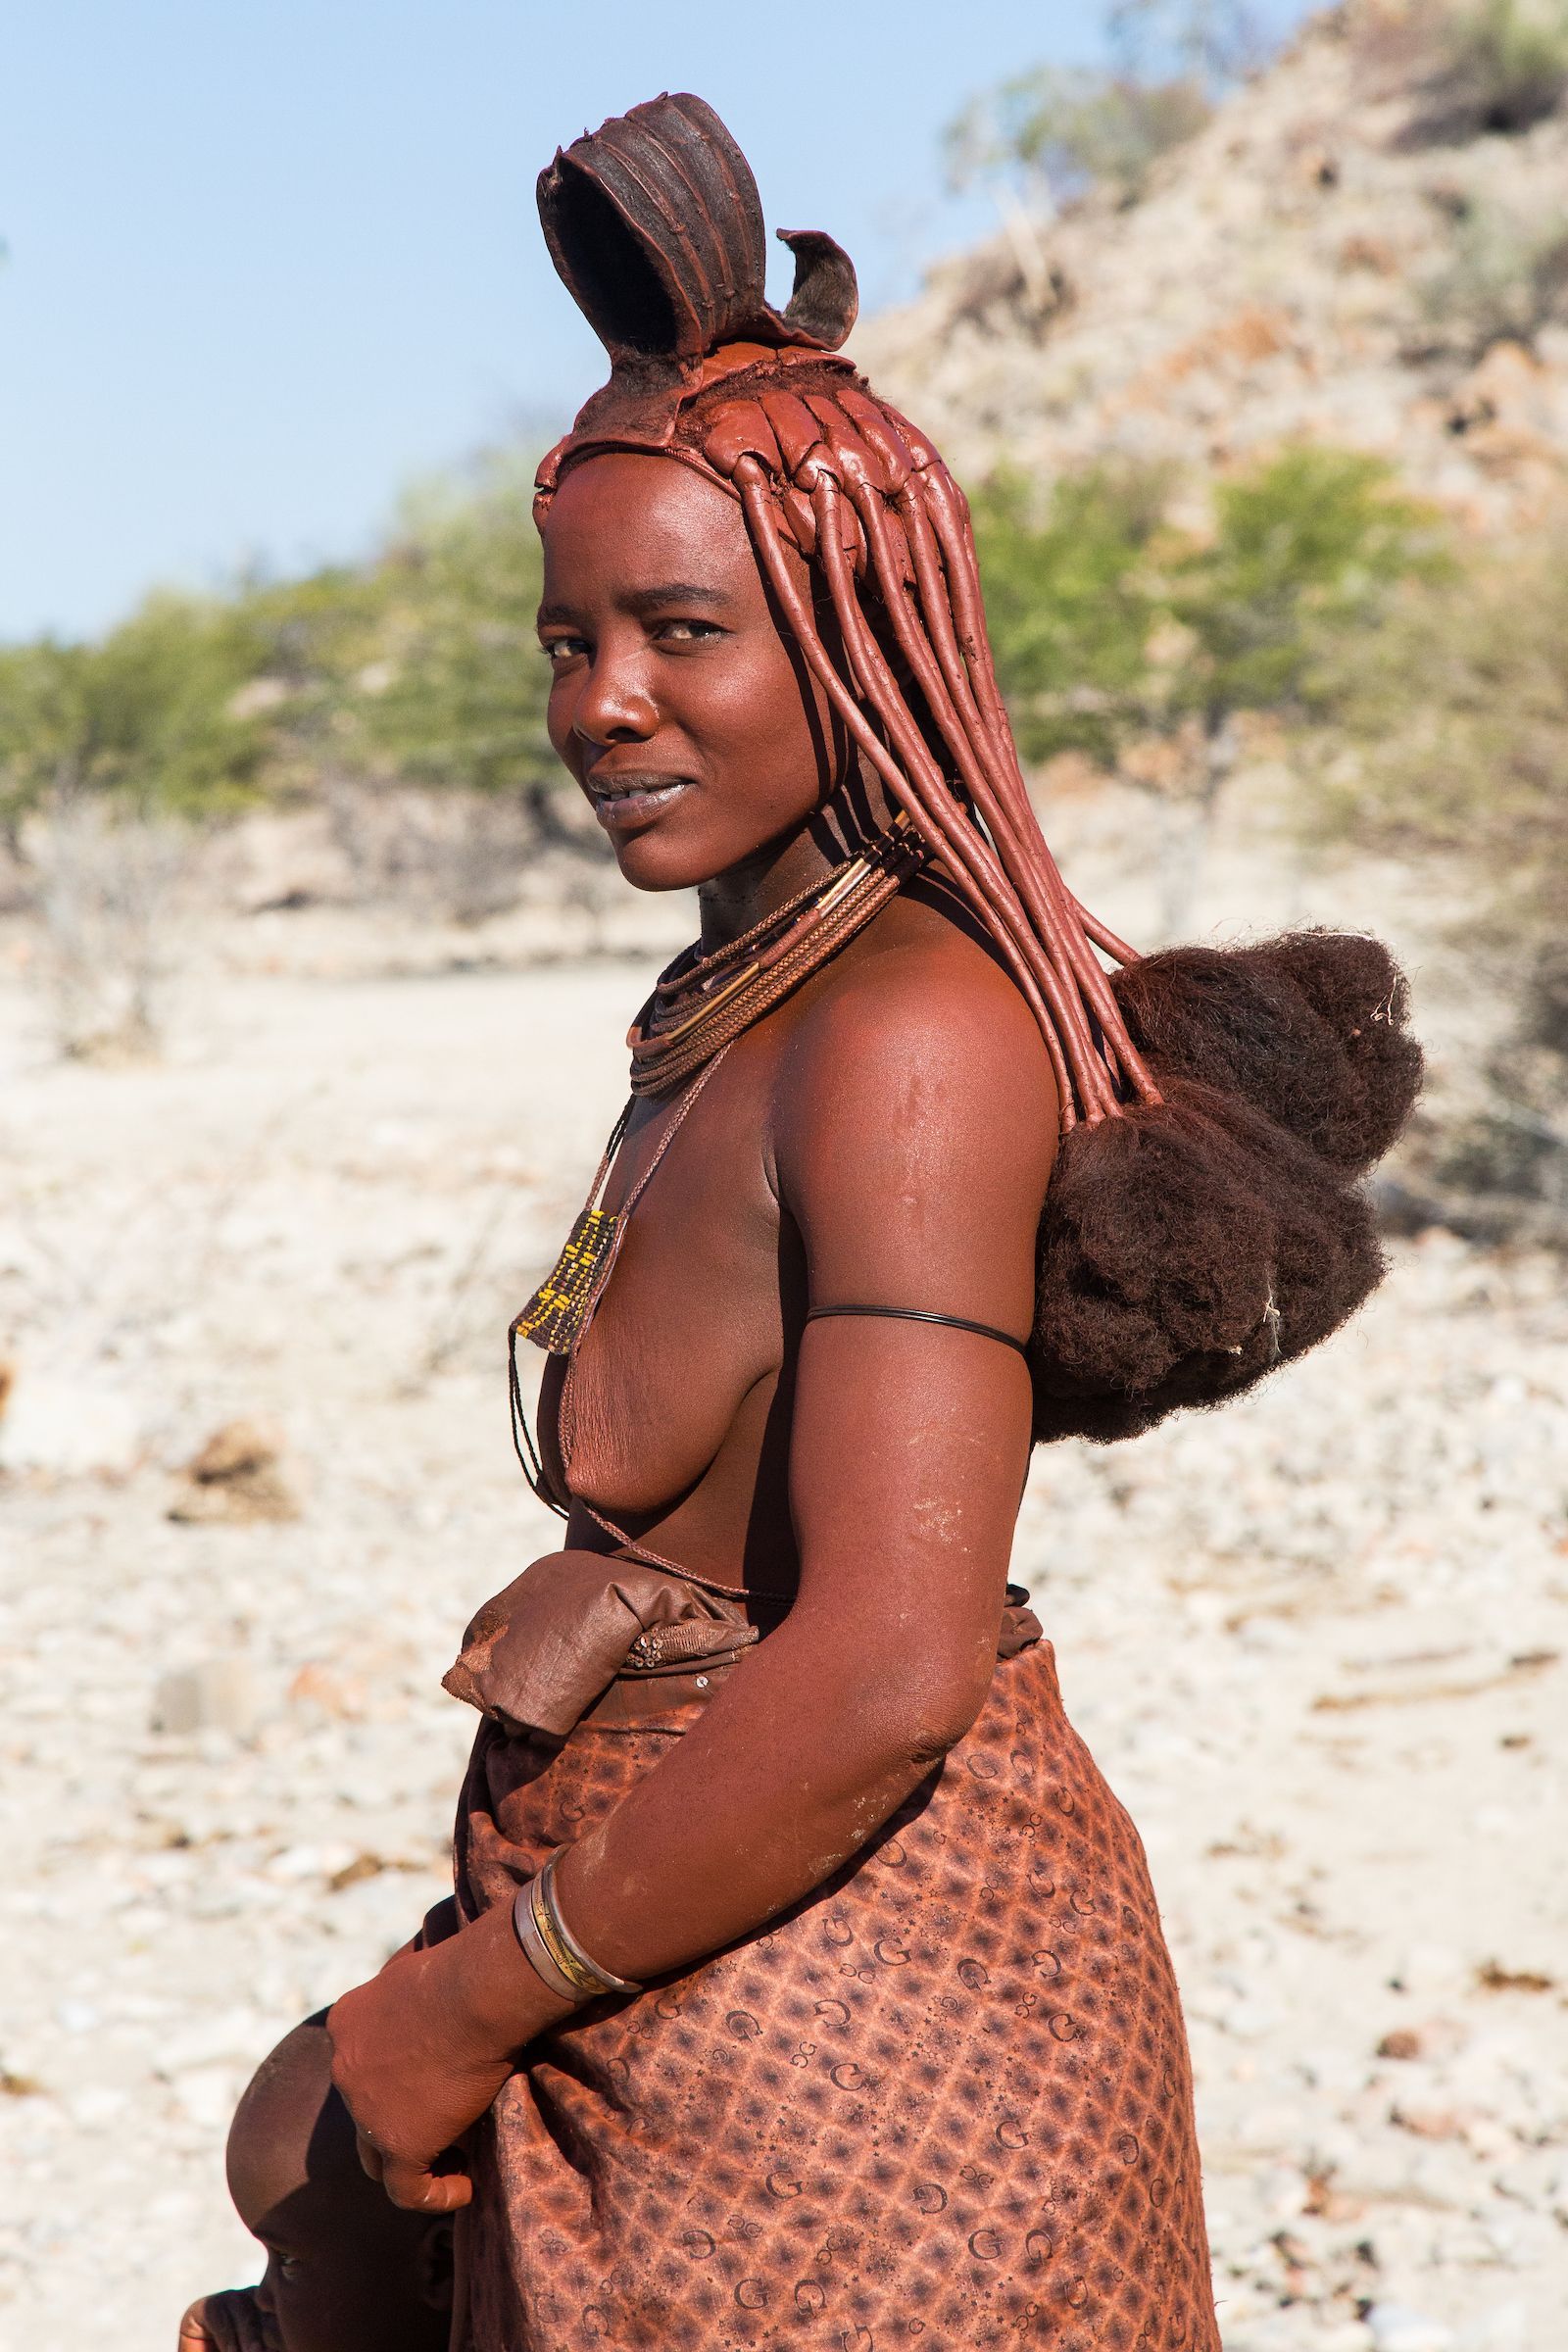 Meet the Himbas, the red ochre people of the desert on our Namibia photography tour